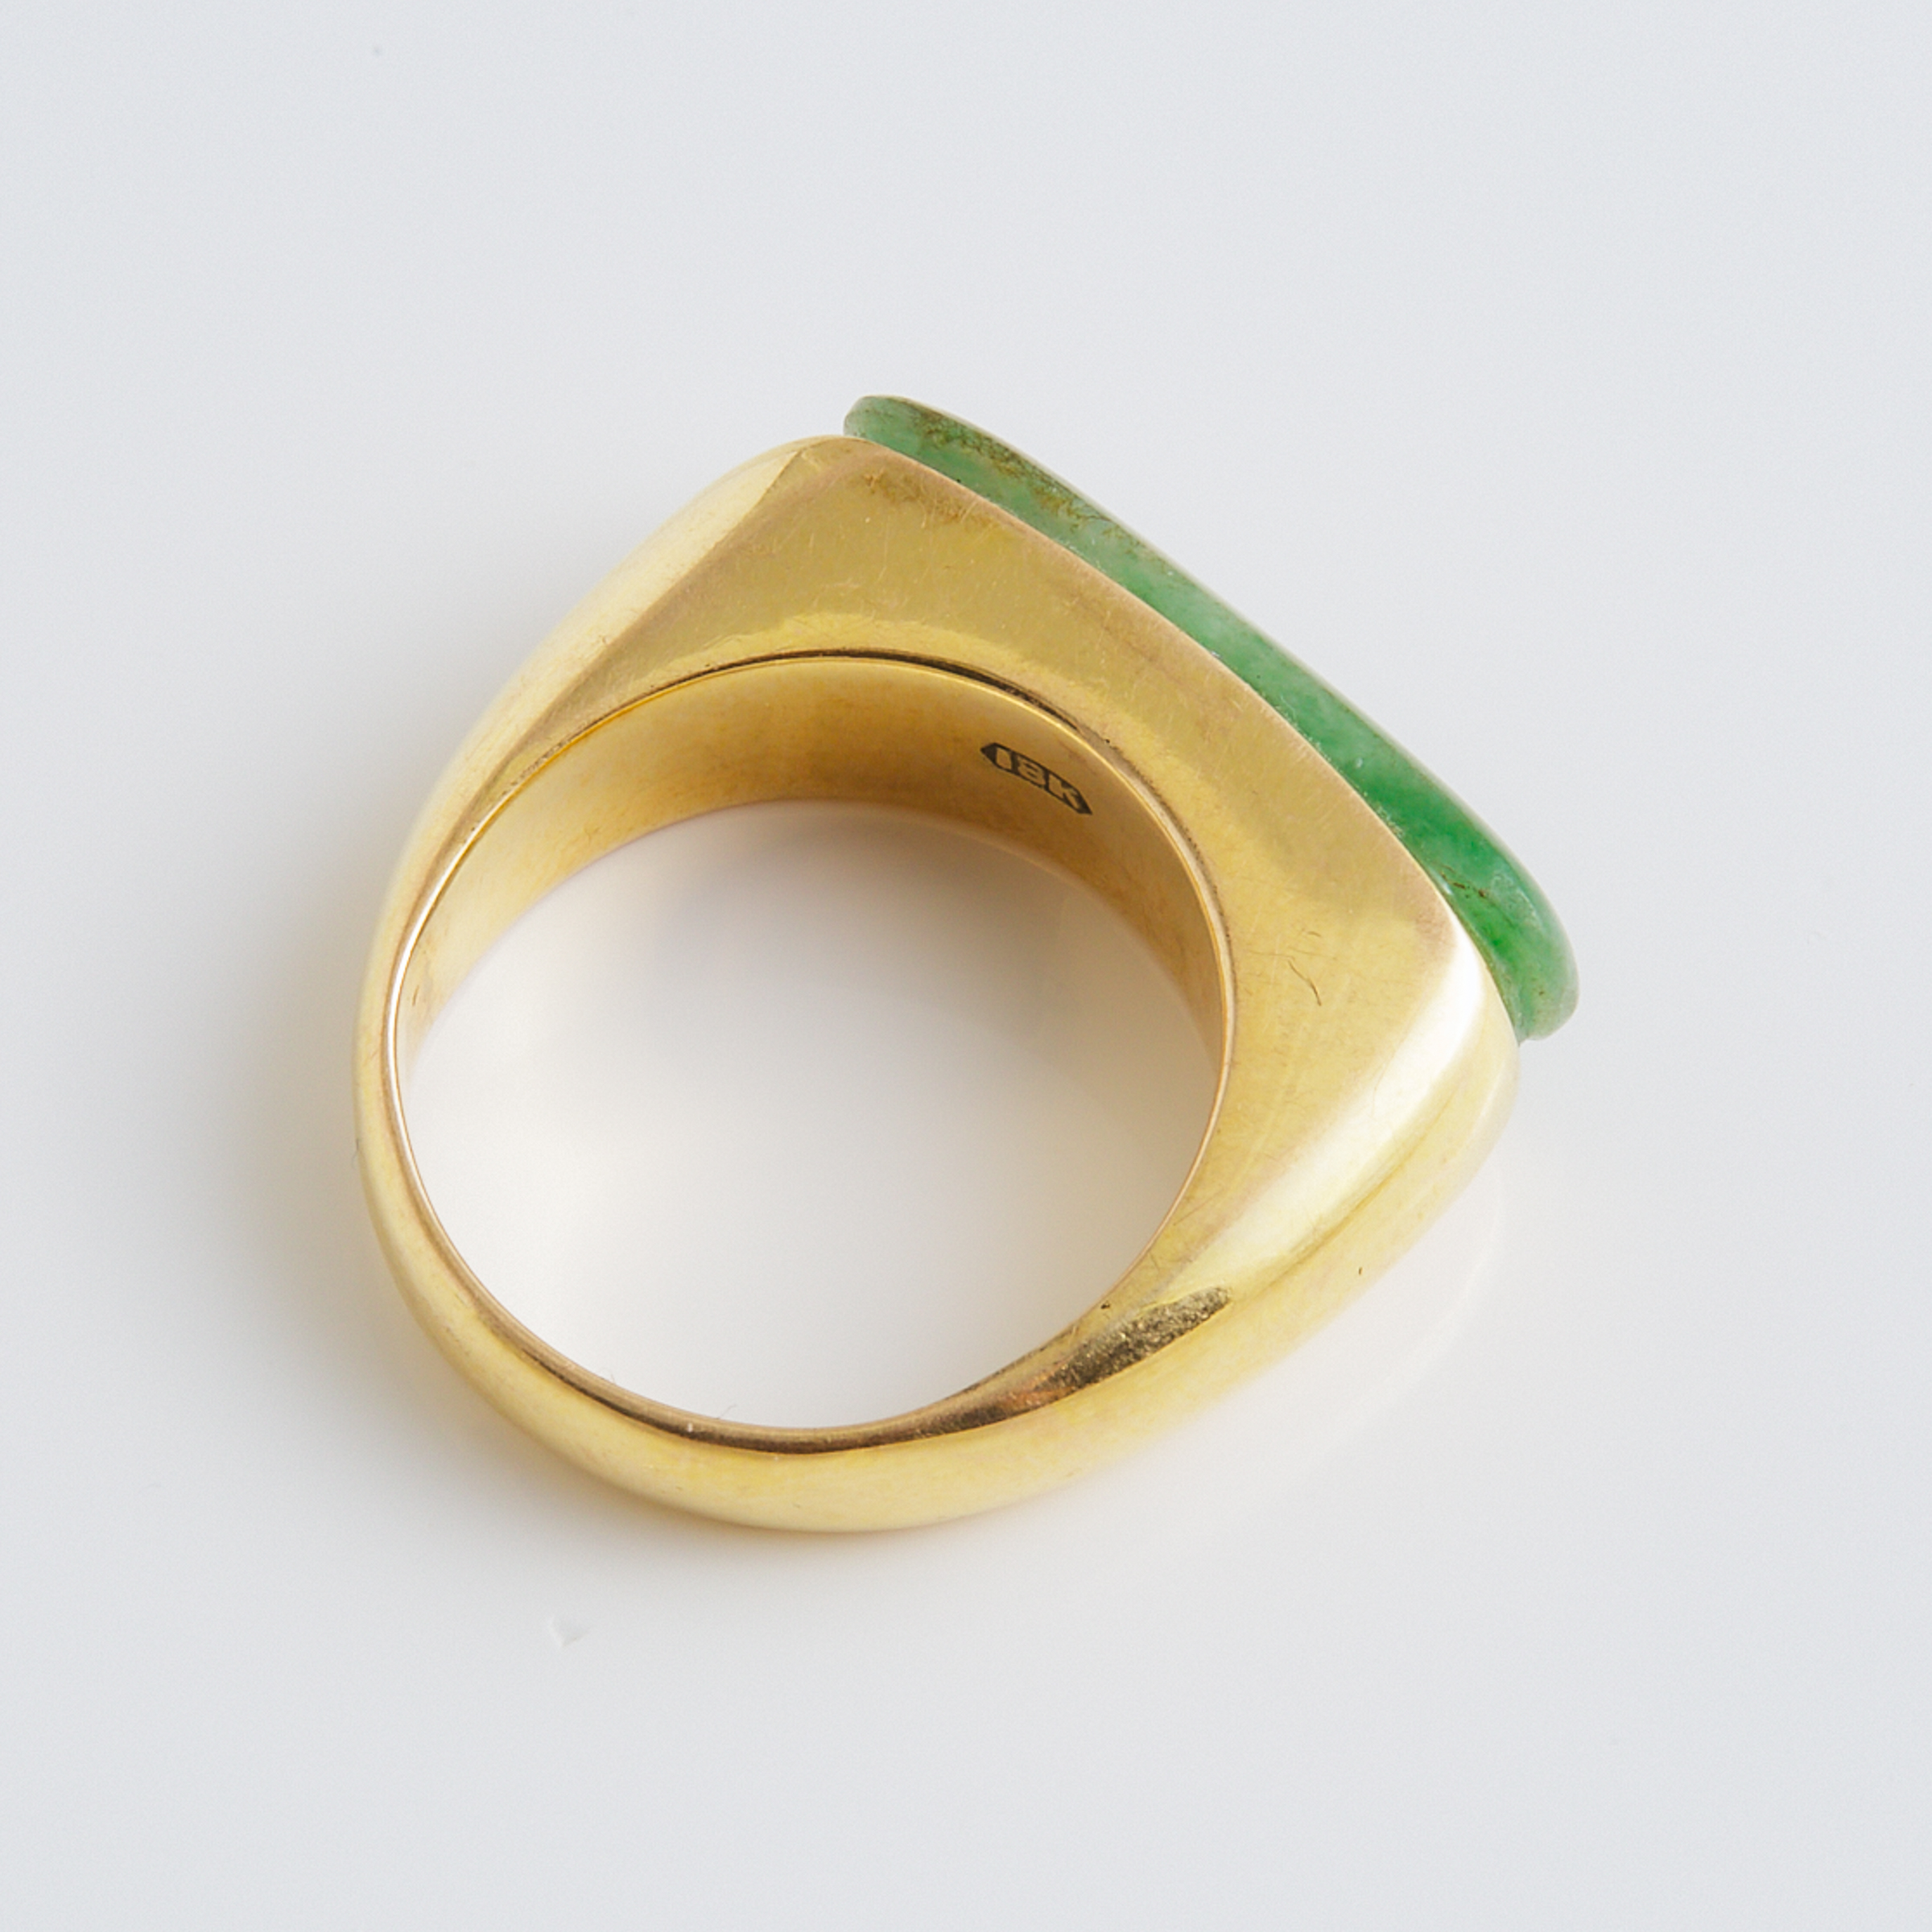 Approximately 16k Yellow Gold Ring